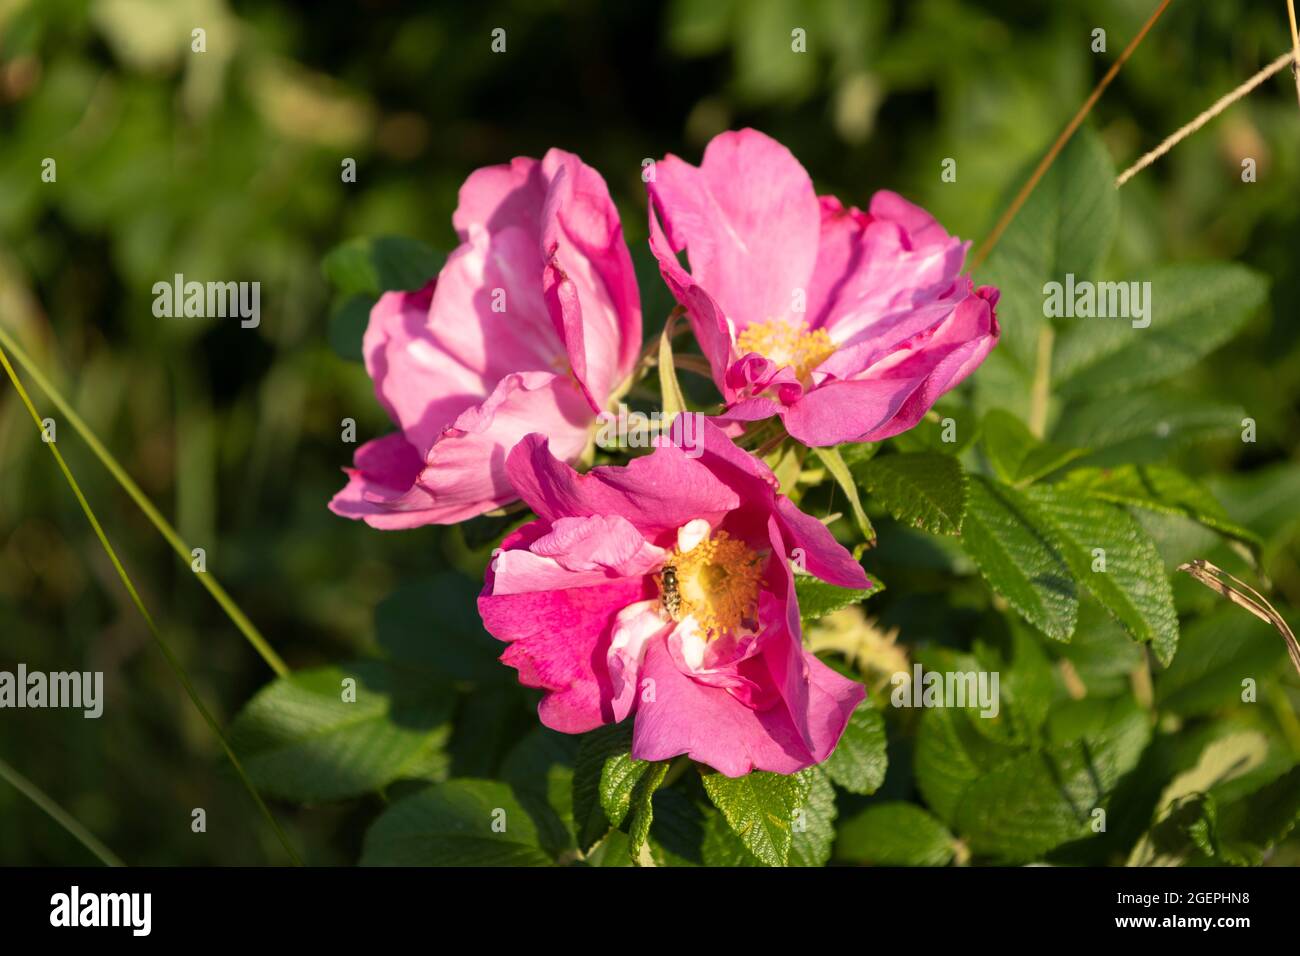 Dog rose (Rosa canina) in bloom Stock Photo